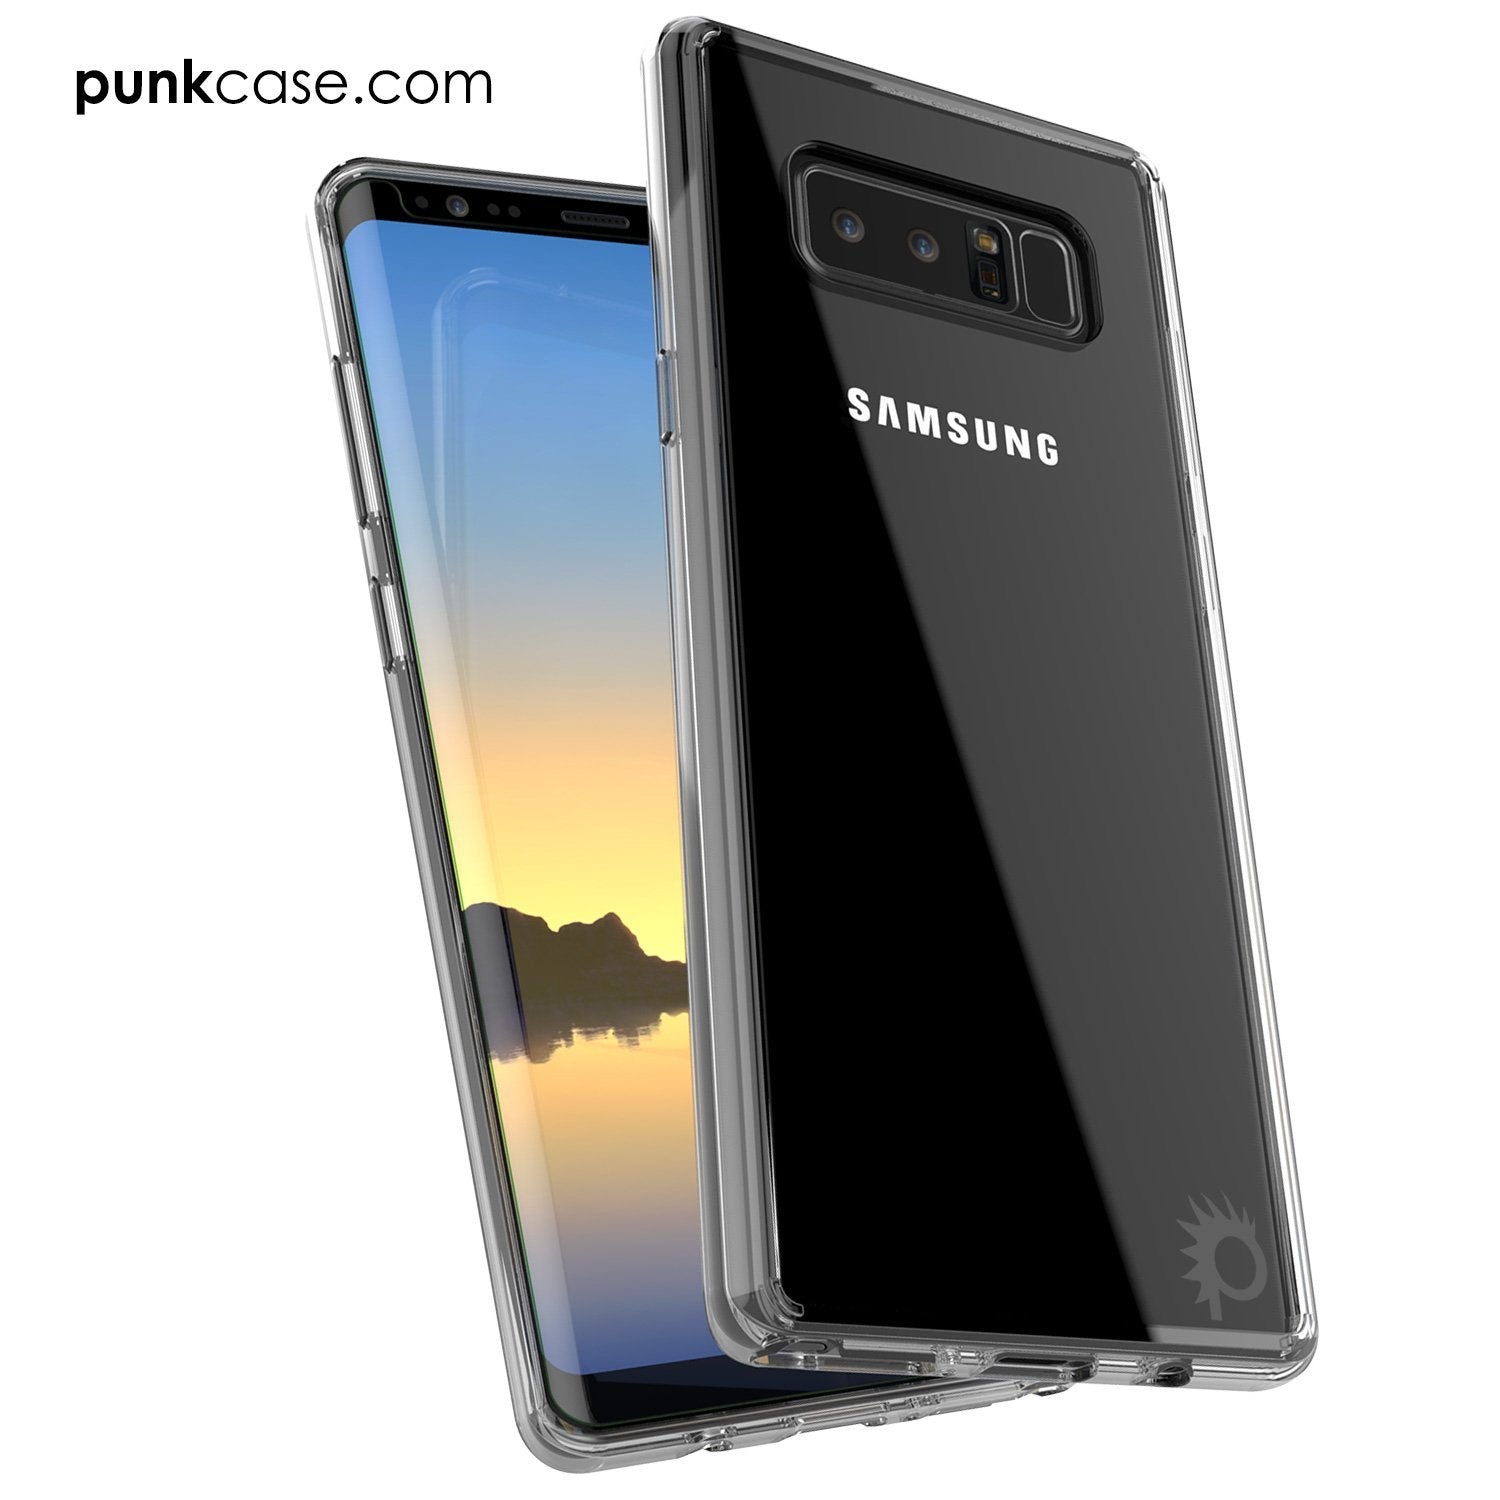 Galaxy Note 8 Punkcase, LUCID 2.0 Series Armor Cover, [Clear]